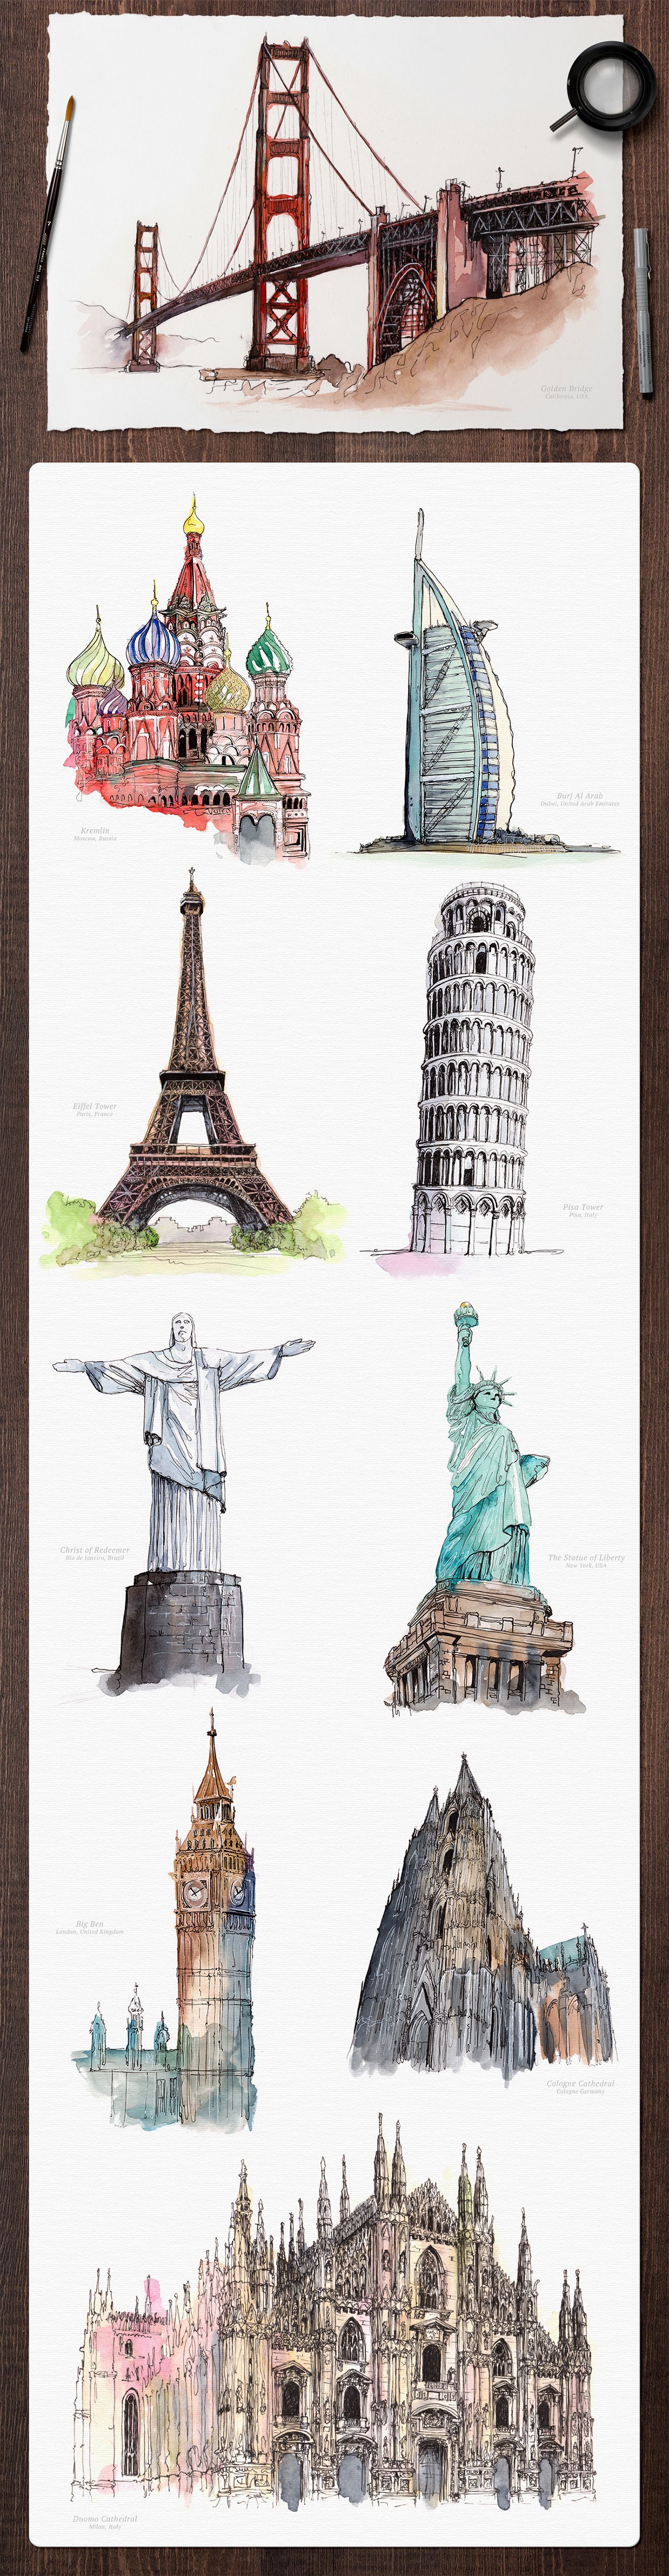 Watercolor Monument / Landmarks Paintings Pack.GET IT FROM HEREhttps://creativemar